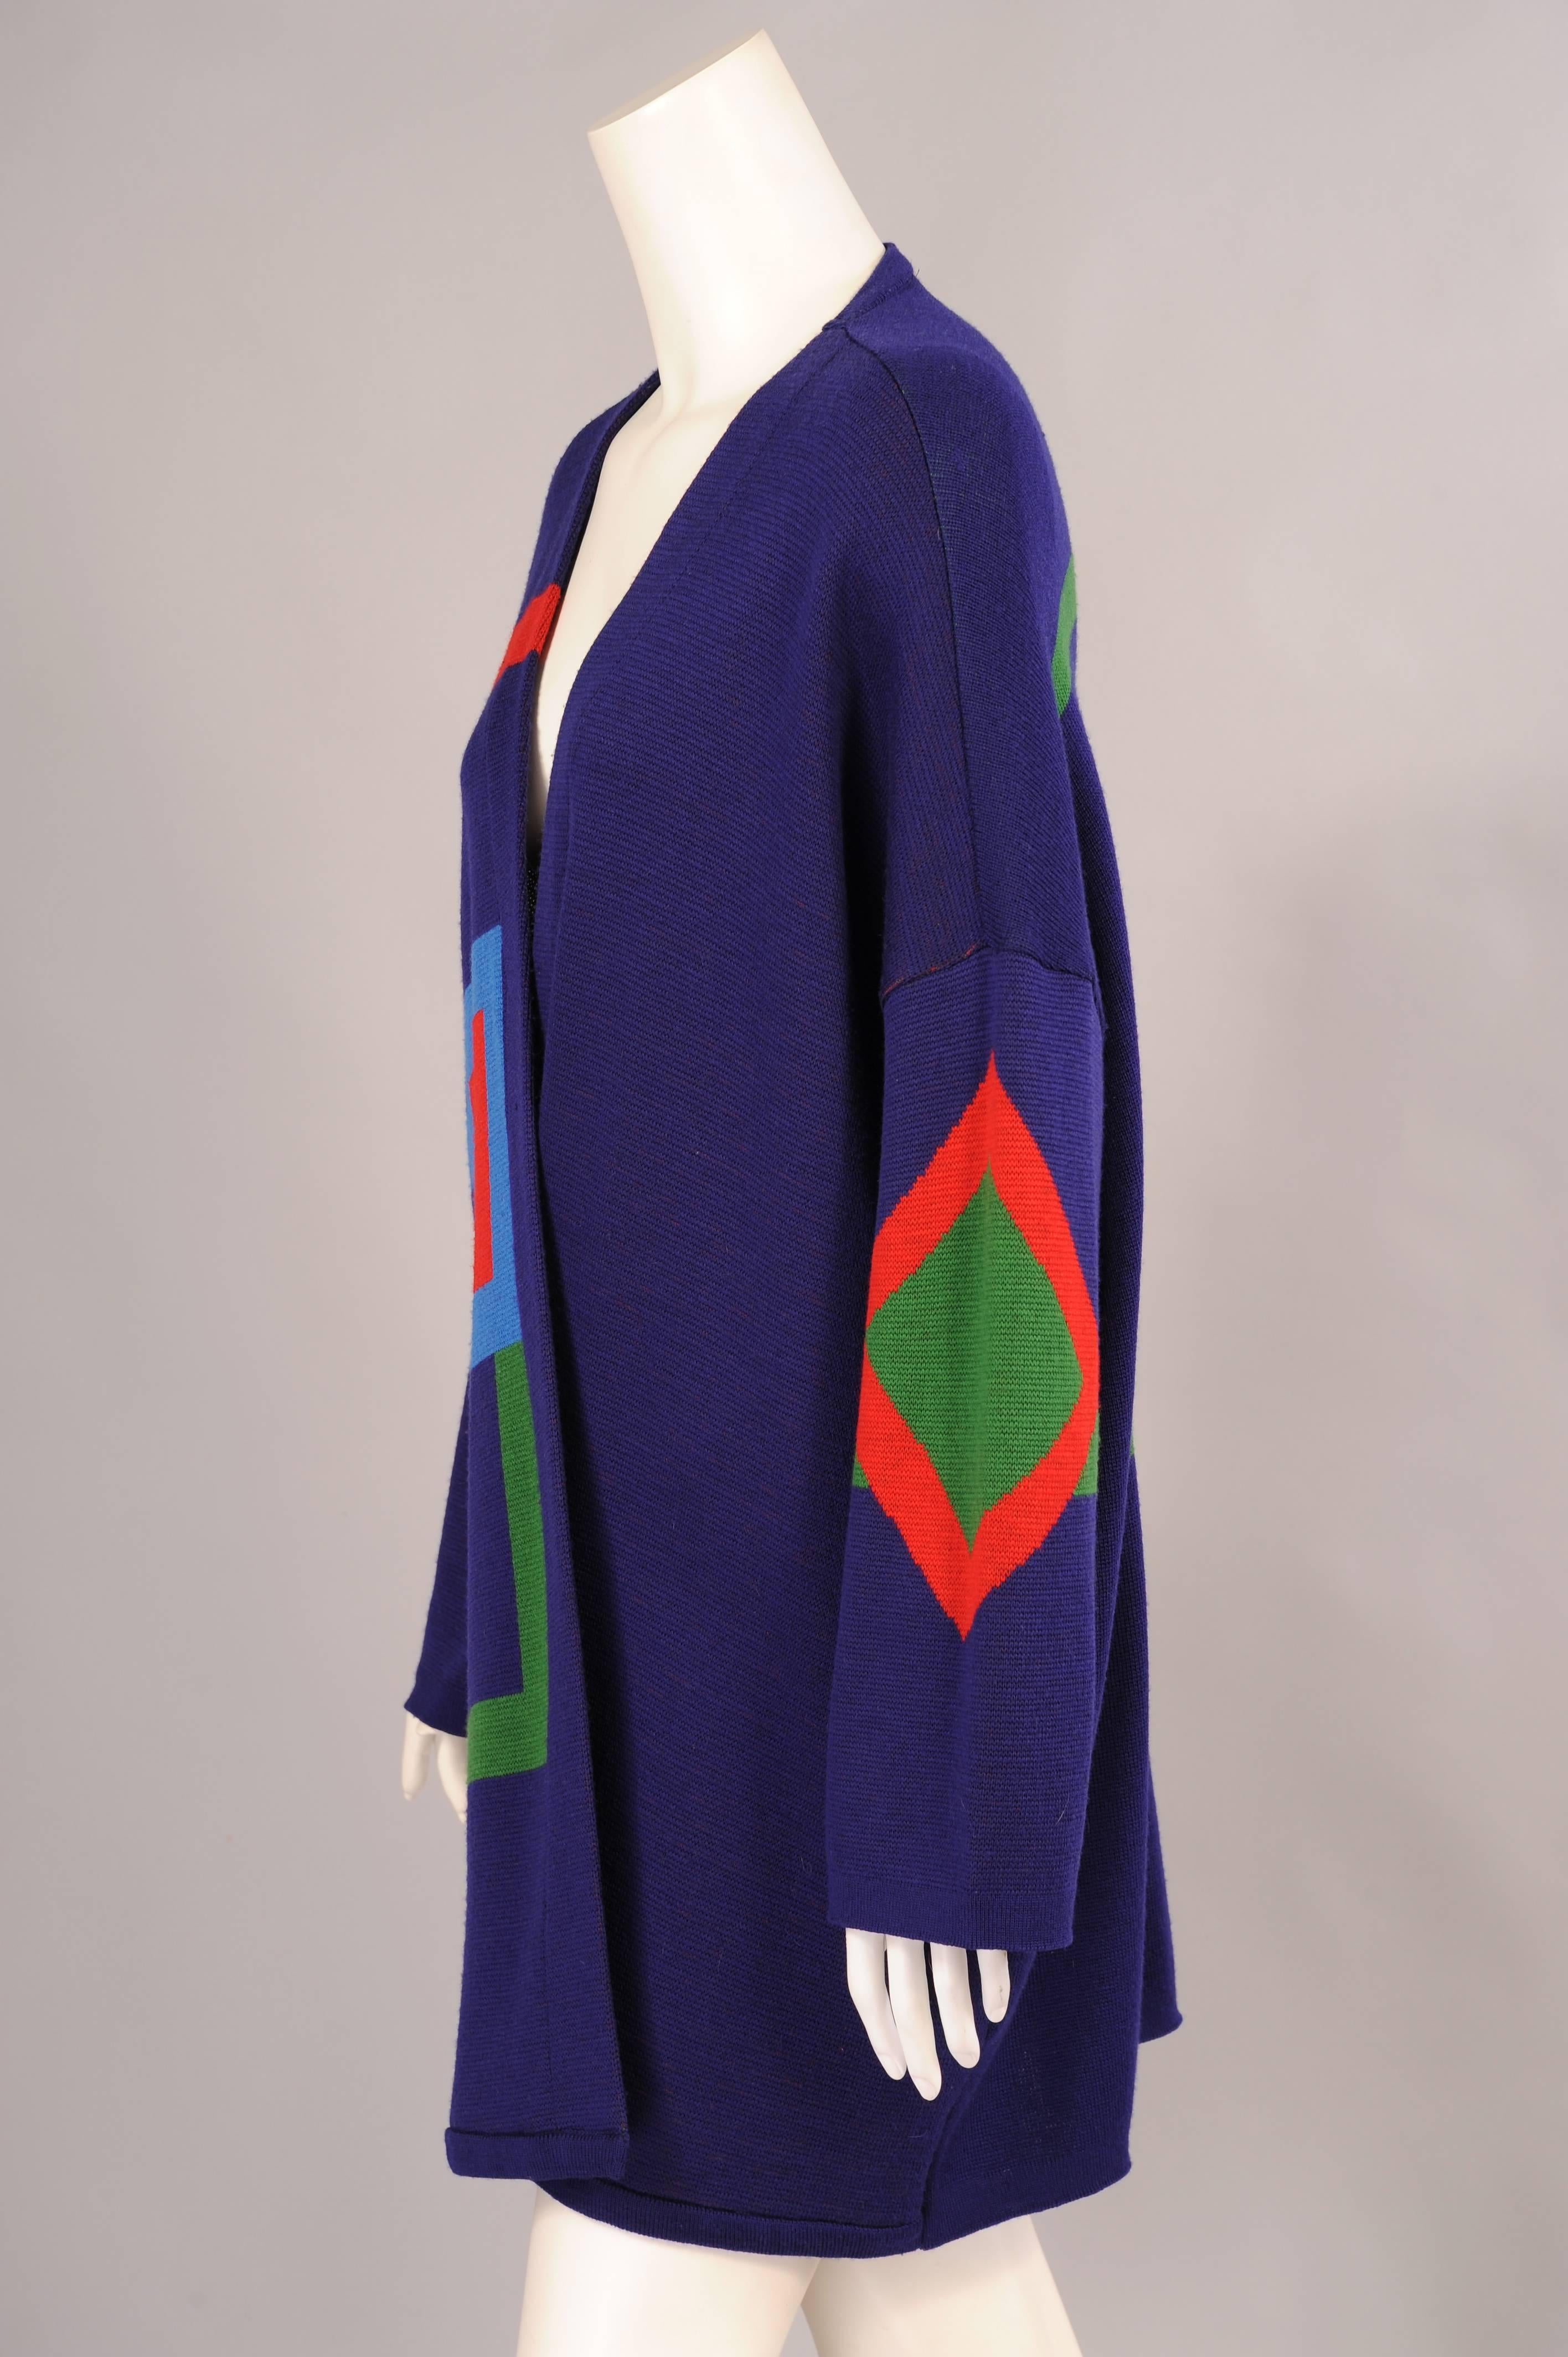 A dark purple wool sweater is enlivened with graphic geometric designs in red, green and blue. These designs are bold and colorful in the iconic style of Marimekko. This cheerful sweater is in excellent condition. One size fits